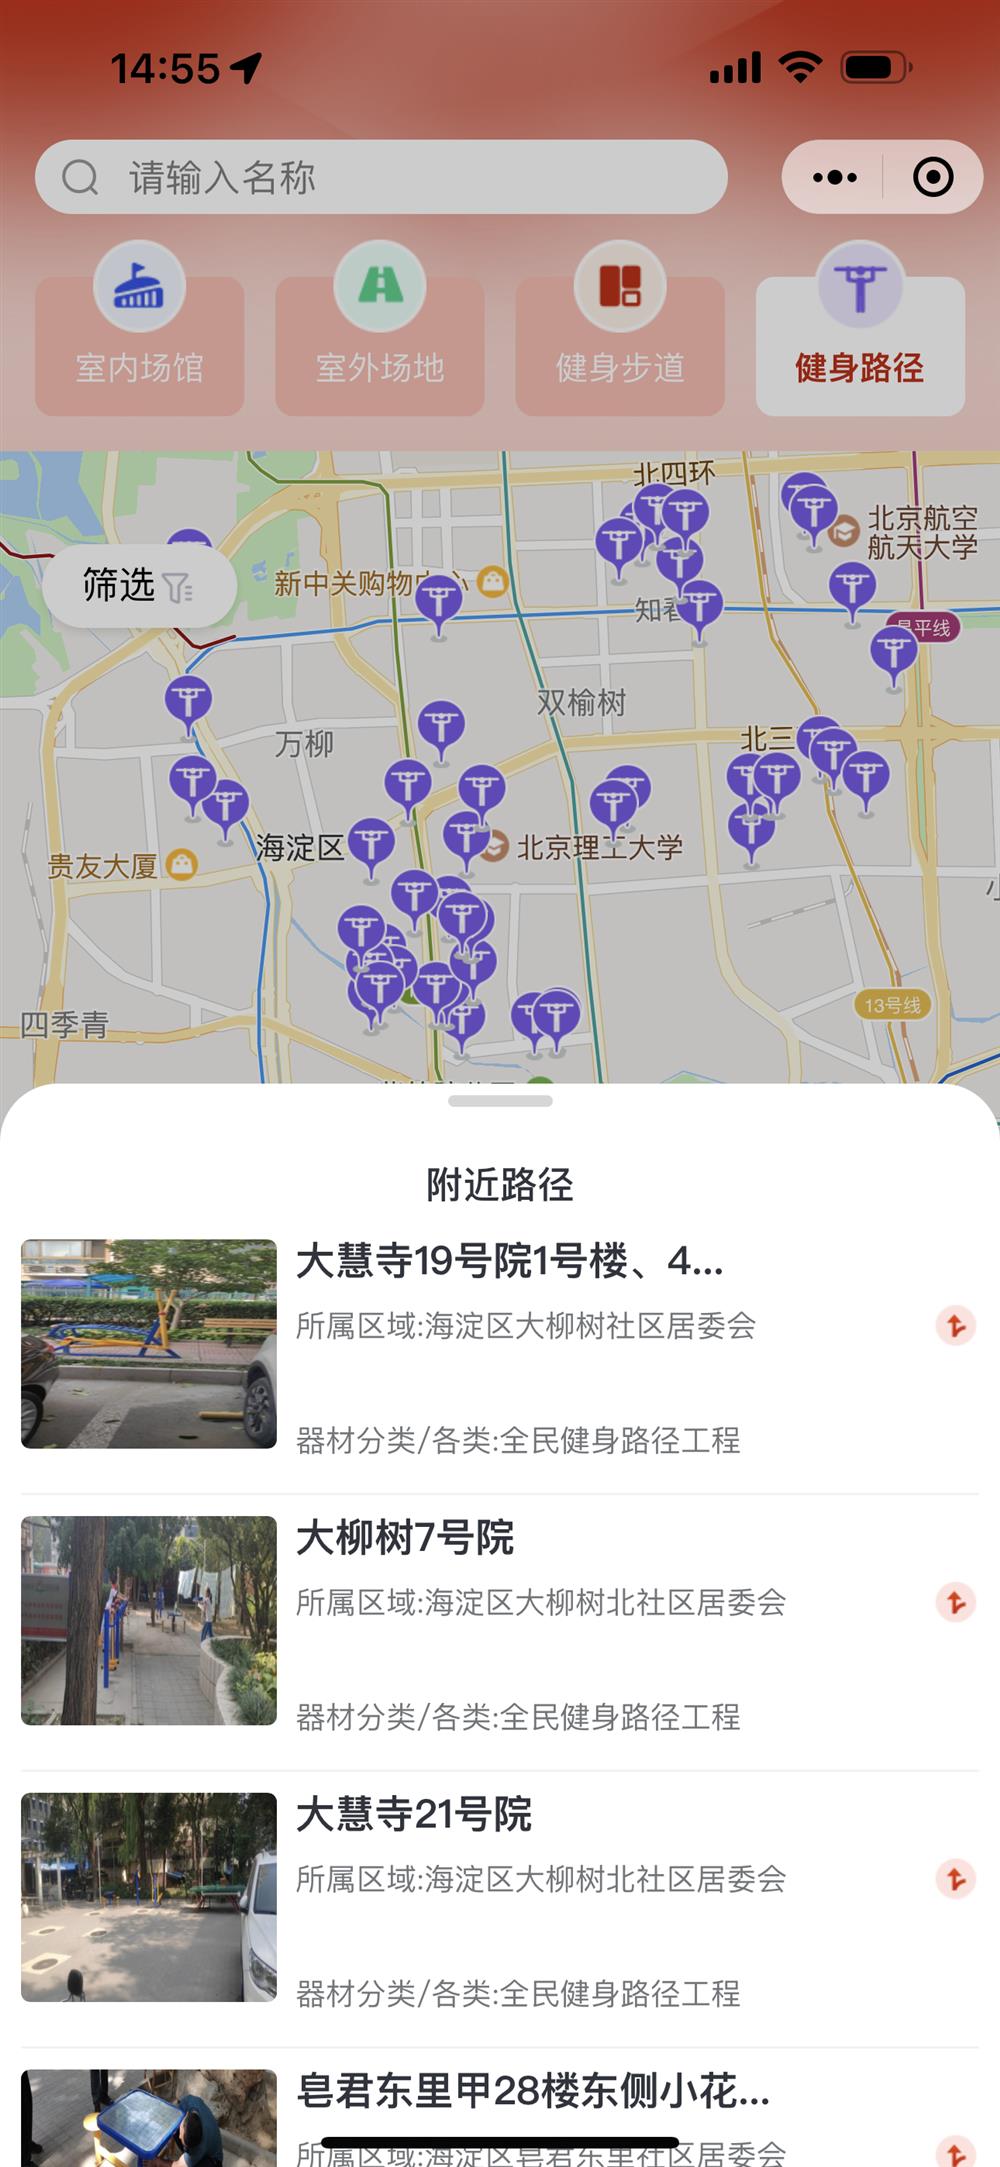 The Beijing Fitness Map Platform will be launched during the Service Trade Fair, with one click to find venues for sports and fitness. | Platform | Fitness